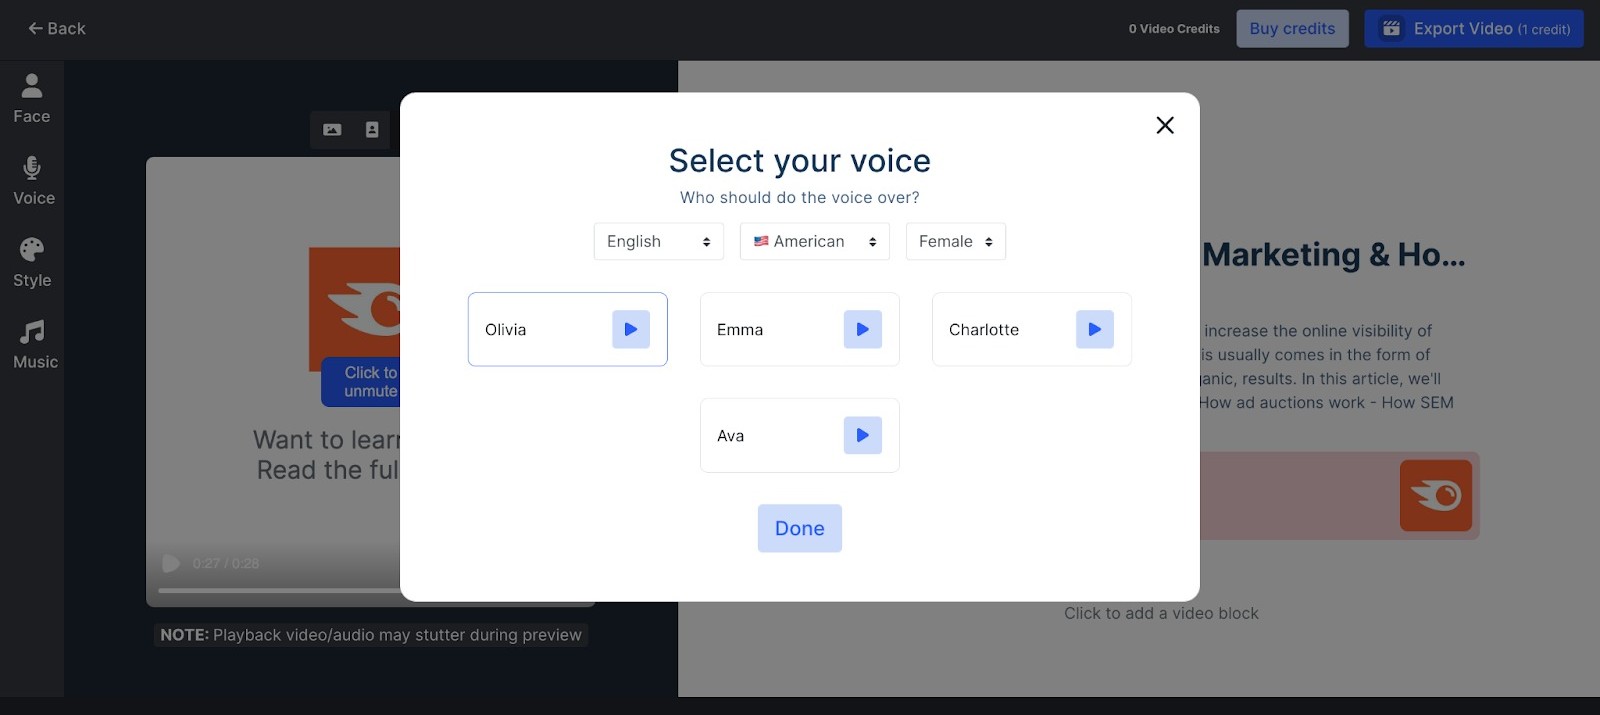 Sample voiceover settings. In this example, the options are set for English language, American accent, and female voice. From this, there are four different voice options, labeled Olivia, Emma, Charlotte, and Ava.